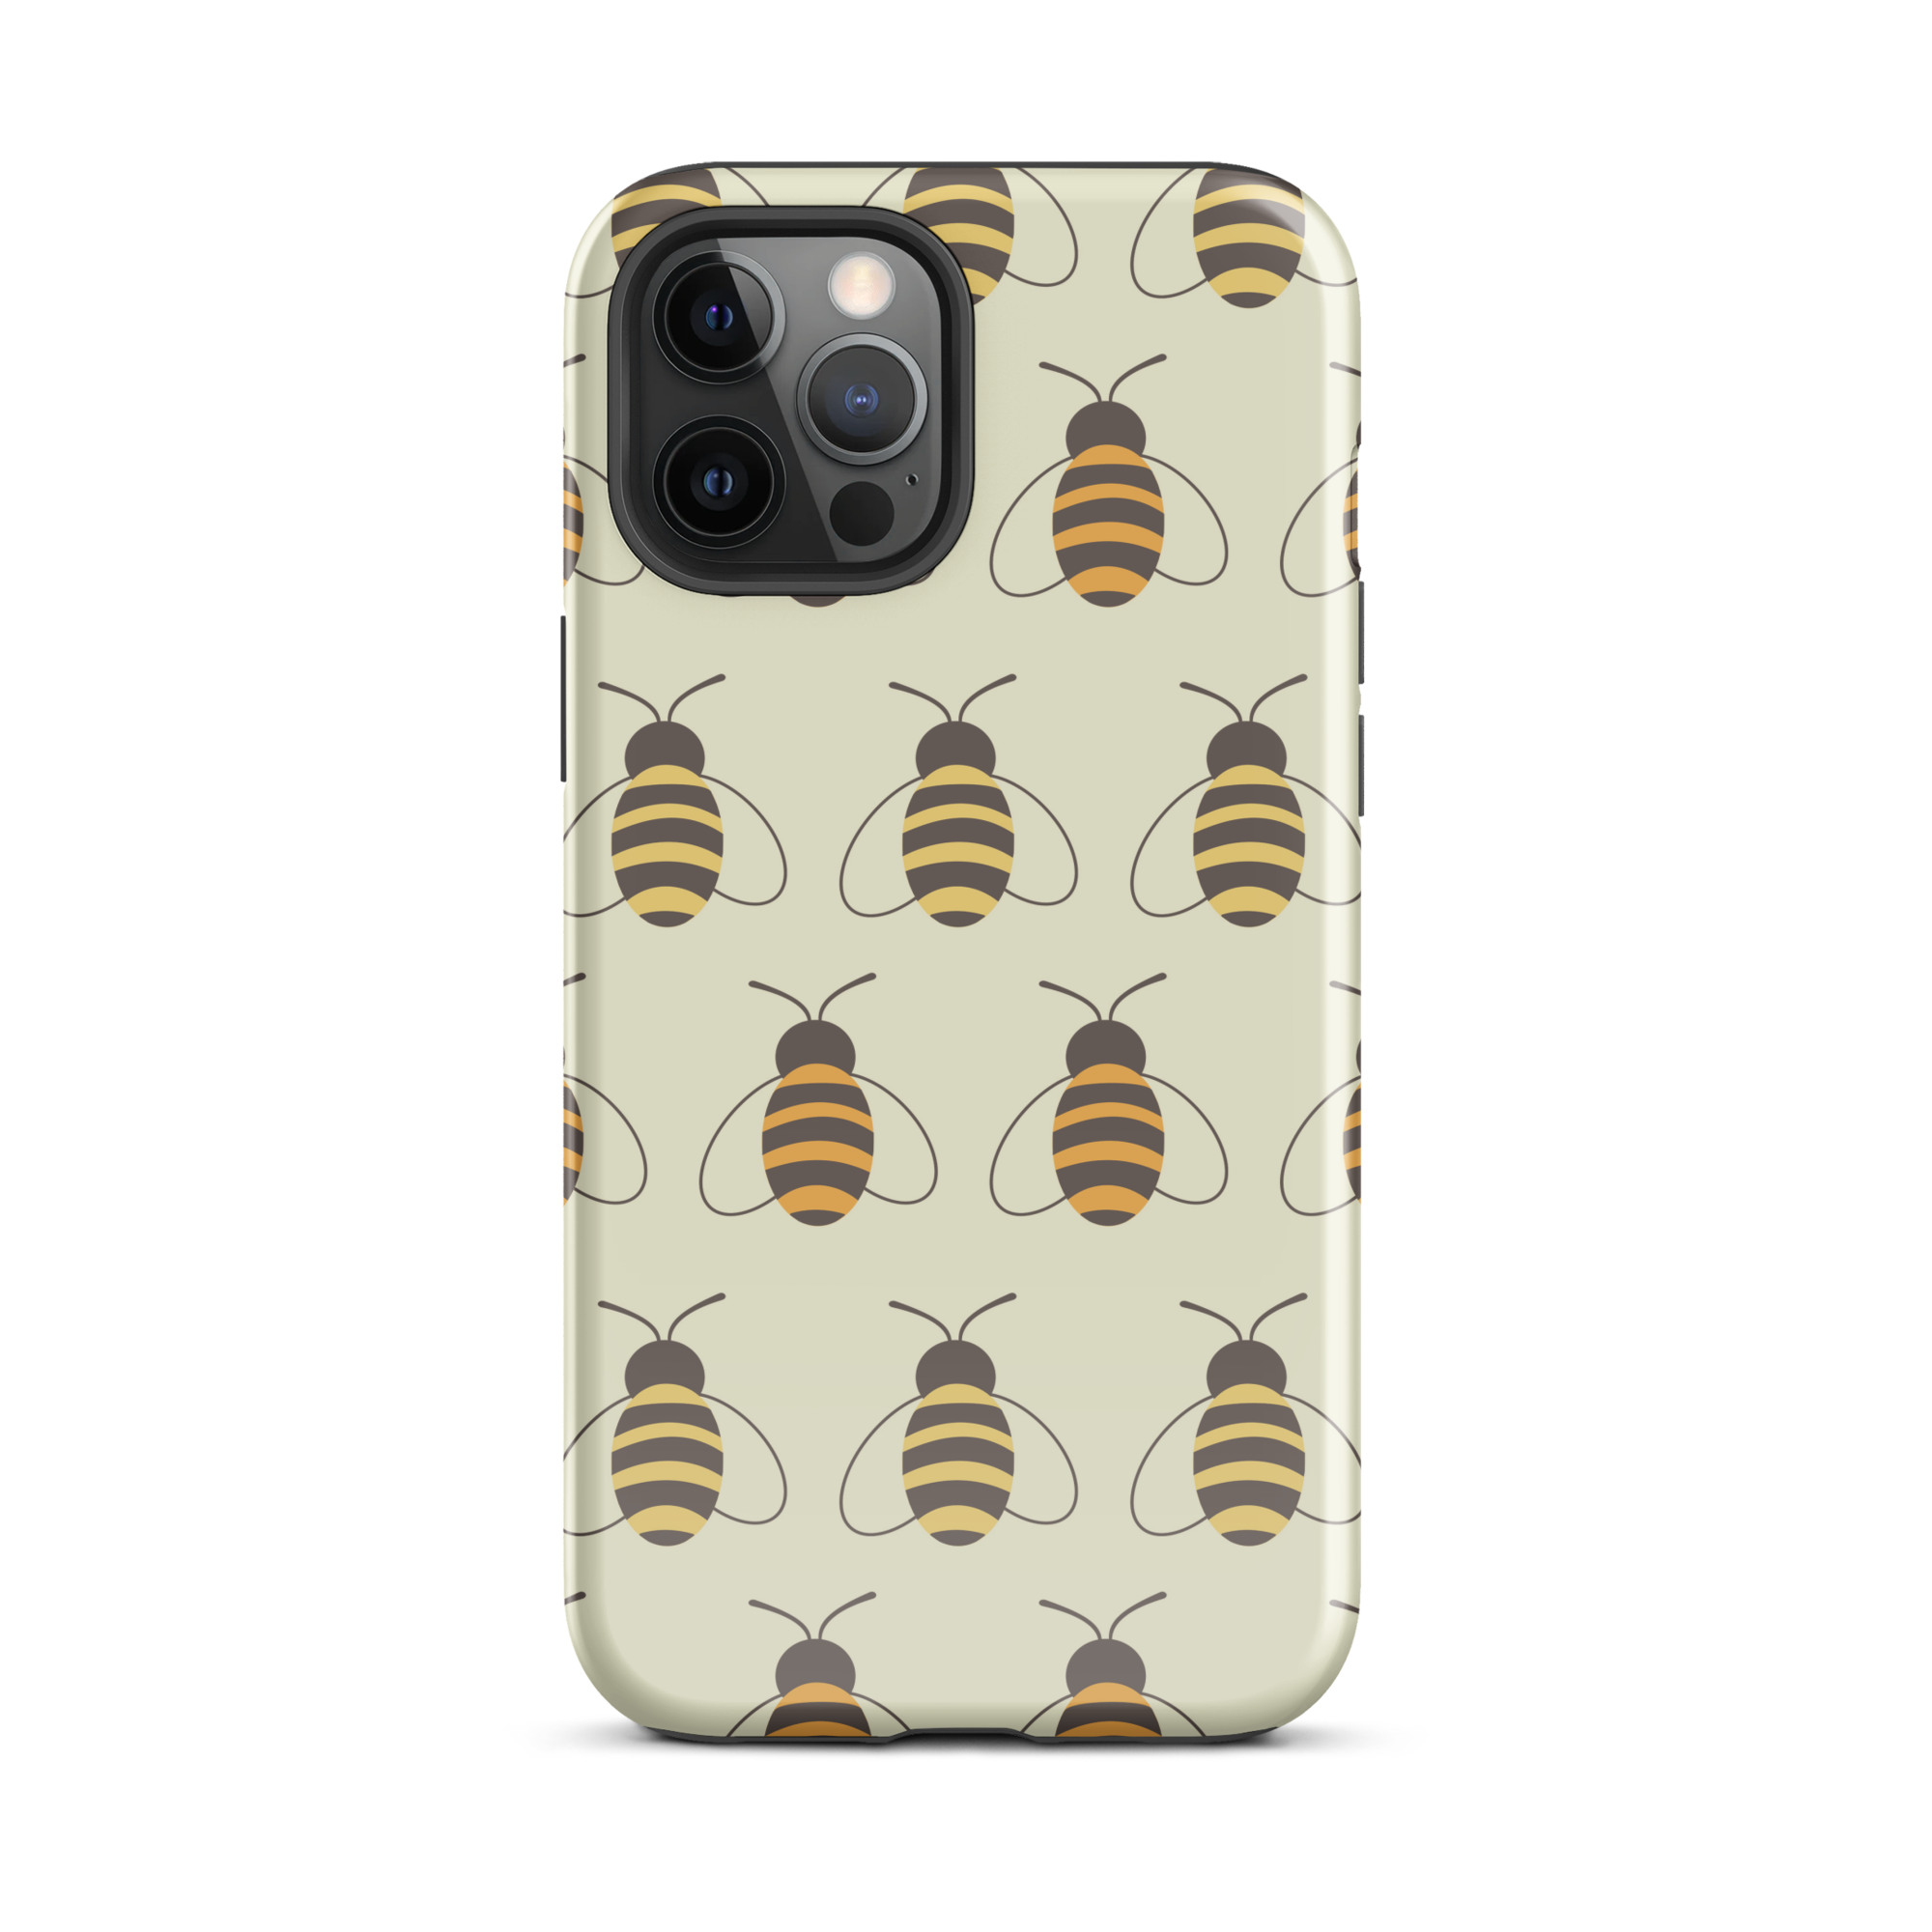 Bees iPhone 12 Pro Max Case